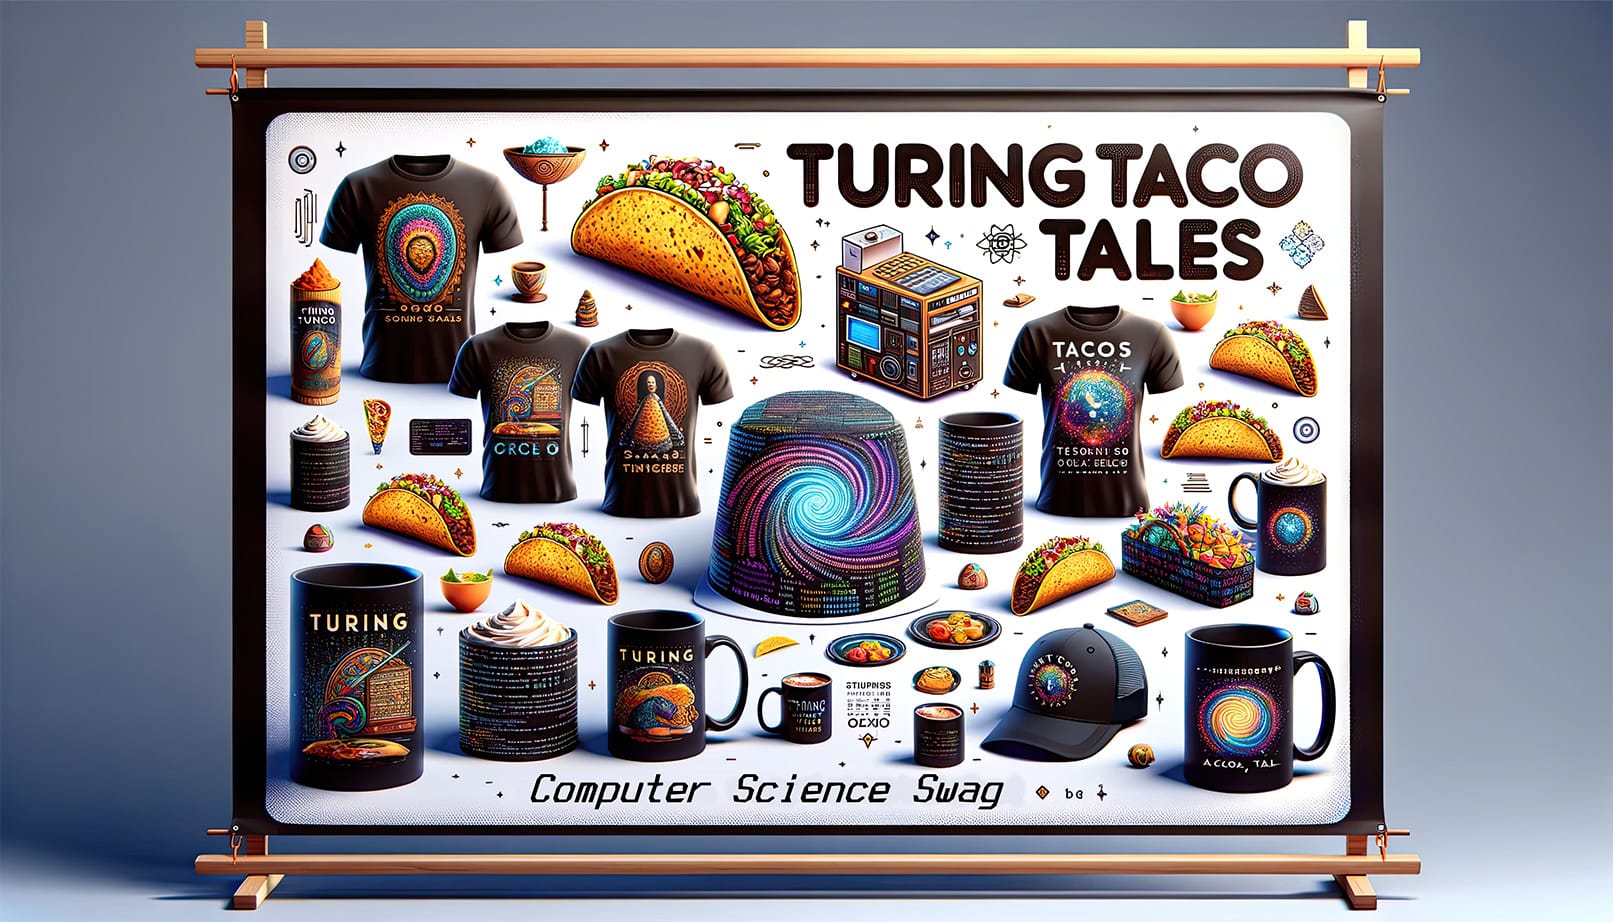 A Banner of The Turing Taco Tales Store